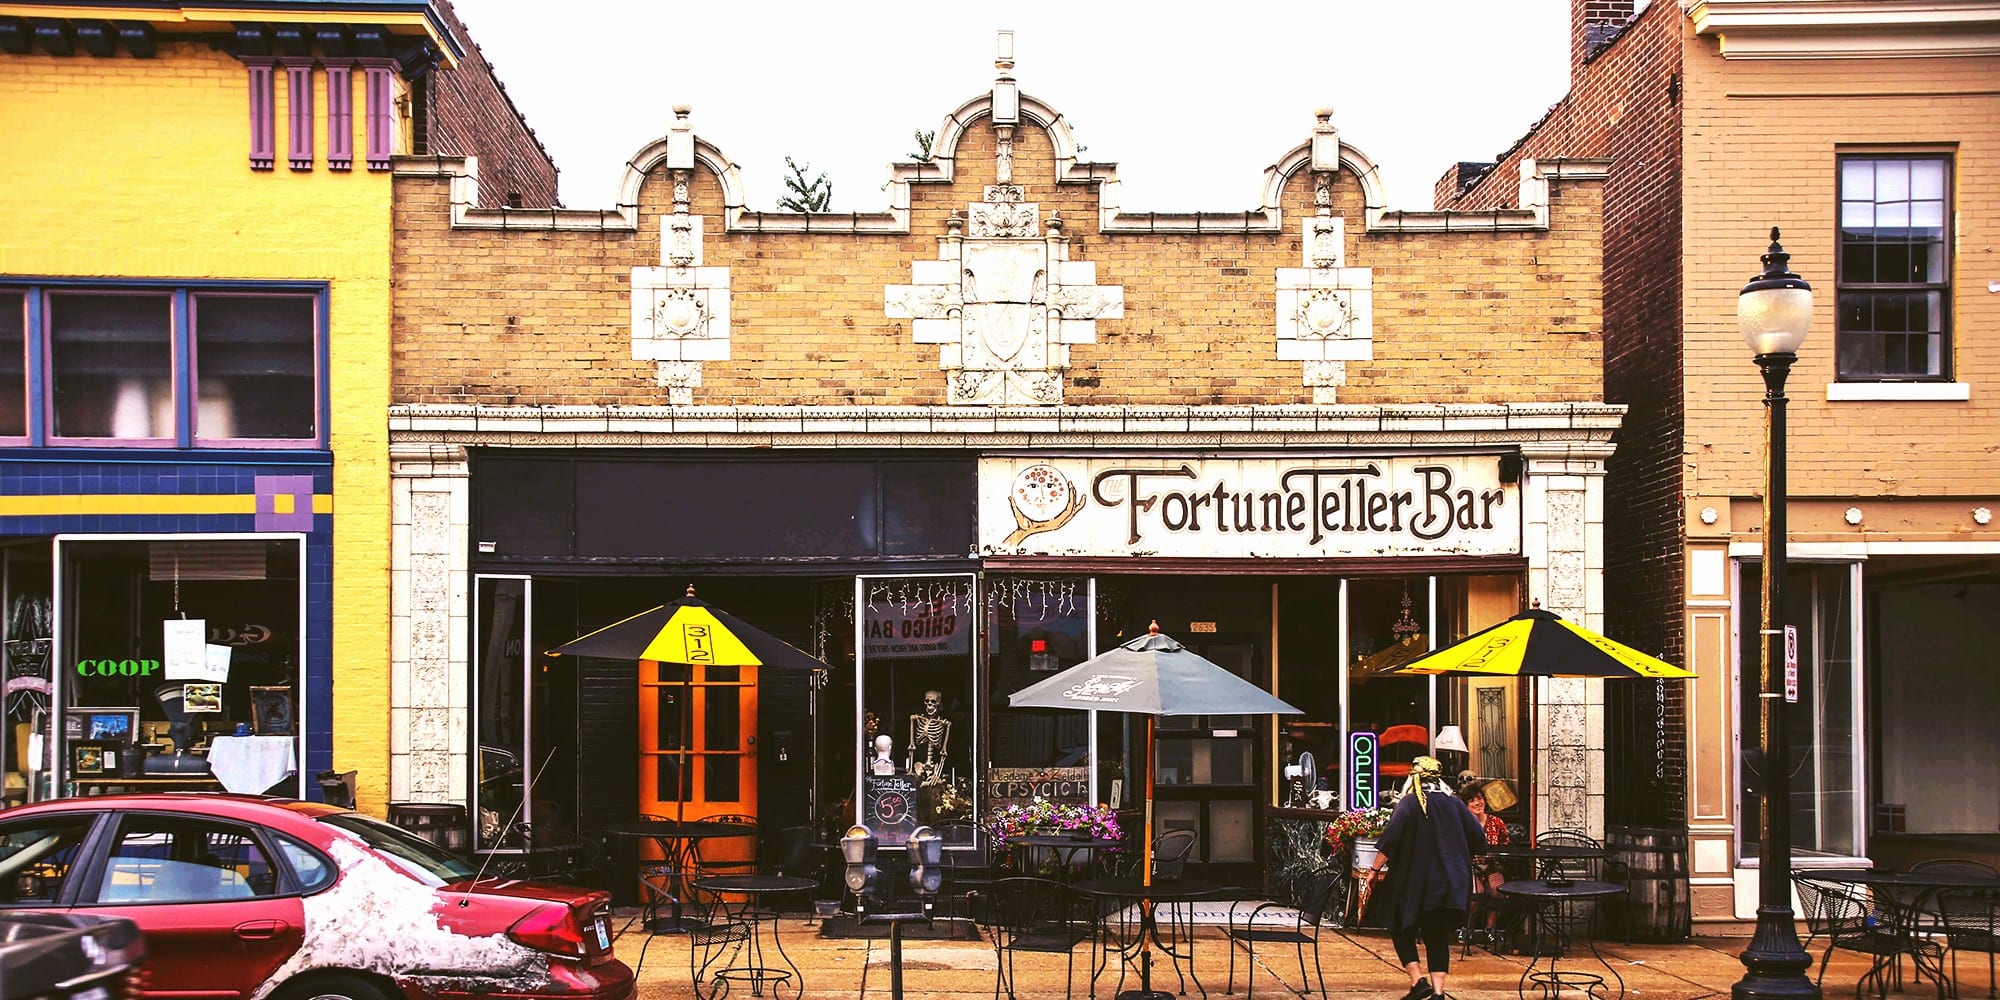 The Fortune Teller Bar on Cherokee Street. Photo by Paul Sableman.